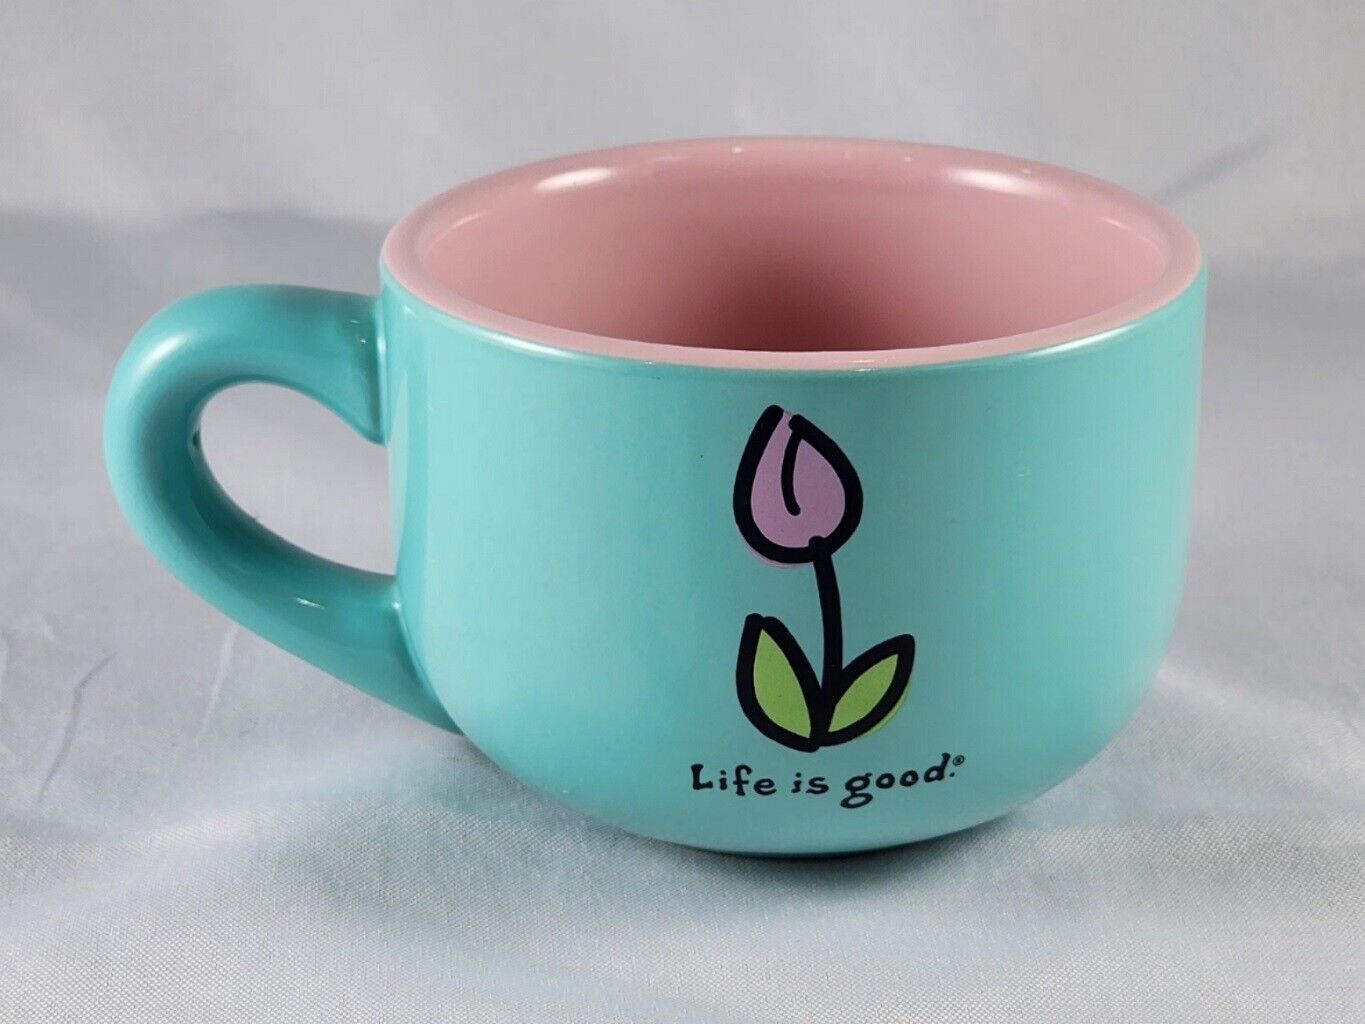 Good Home by Life is Good - Coffee/Cappuccino/Soup Mug/Cup - Light Blue & Pink